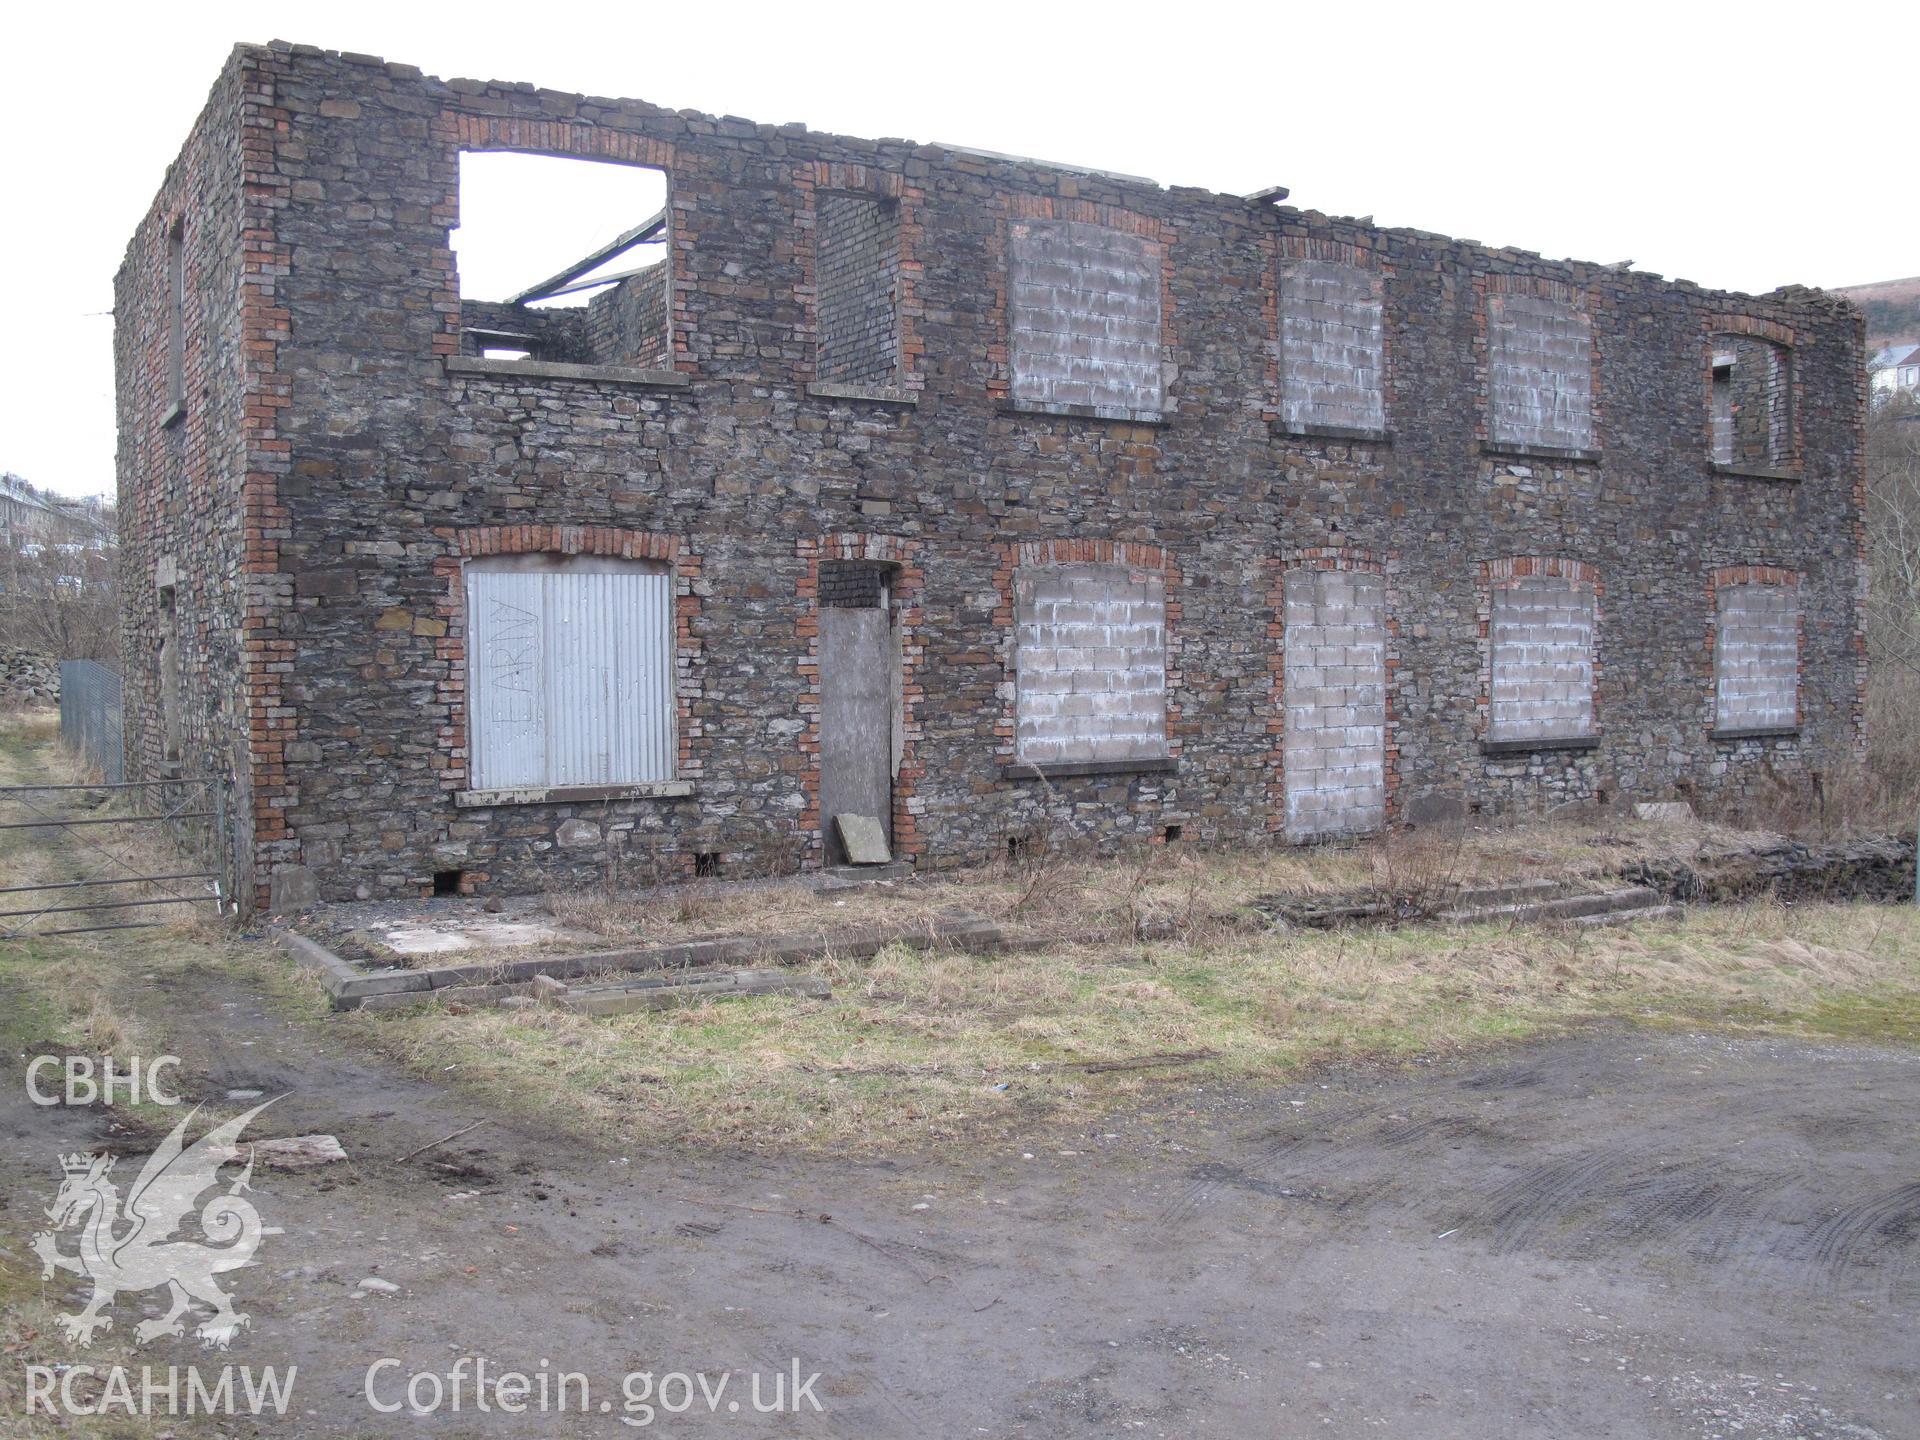 View of Universal Colliery Offices, Senghenydd, from the southwest, taken by Brian Malaws on 12 February 2010.